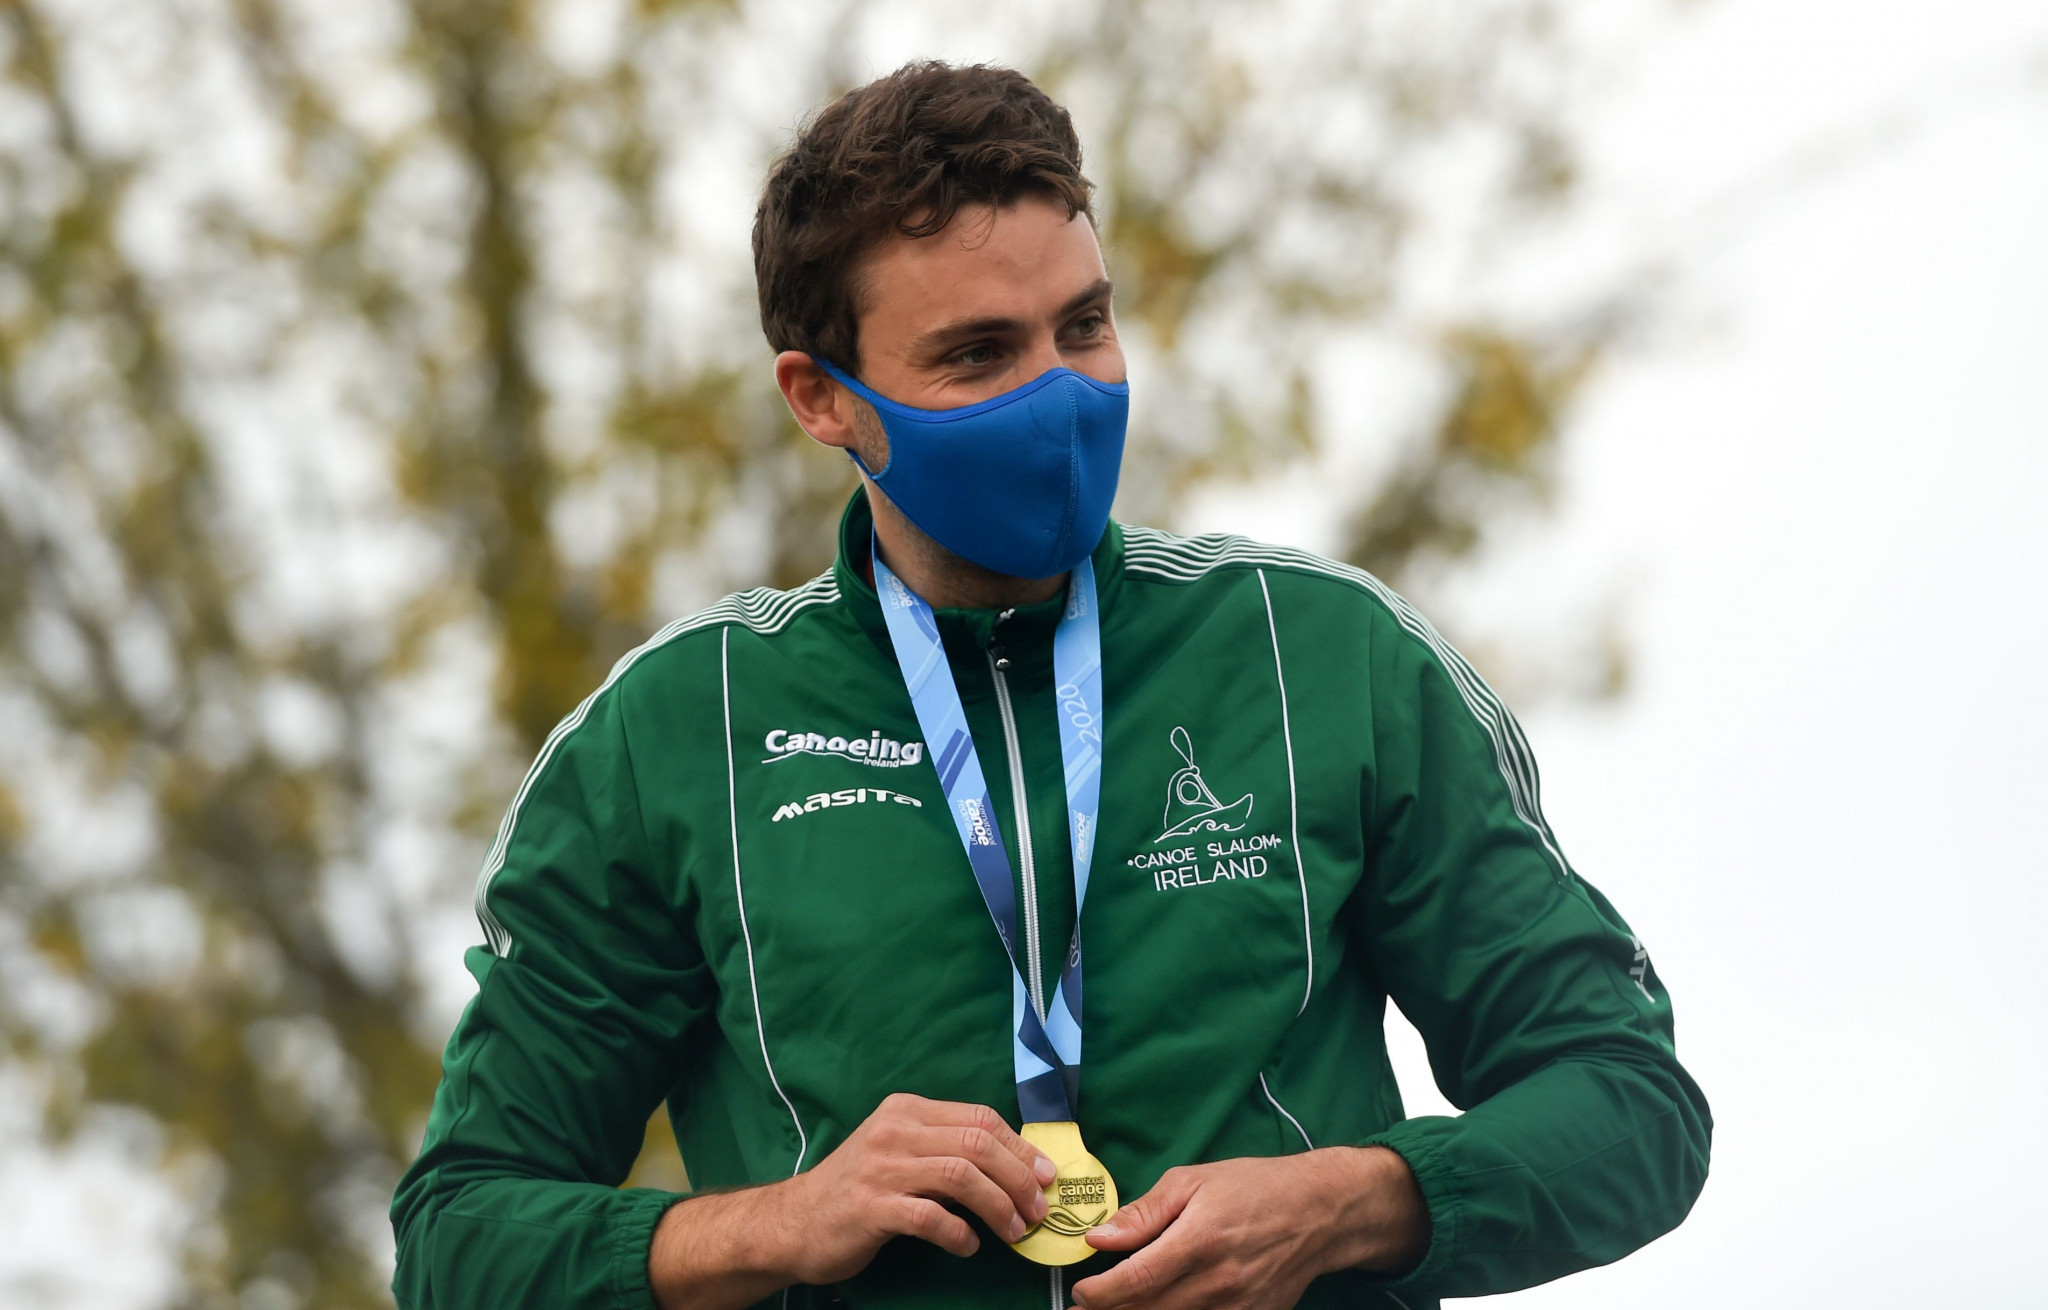 Liam Jegou achieved Ireland's first C1 gold medal at an ICF Canoe Slalom World Cup ©Getty Images